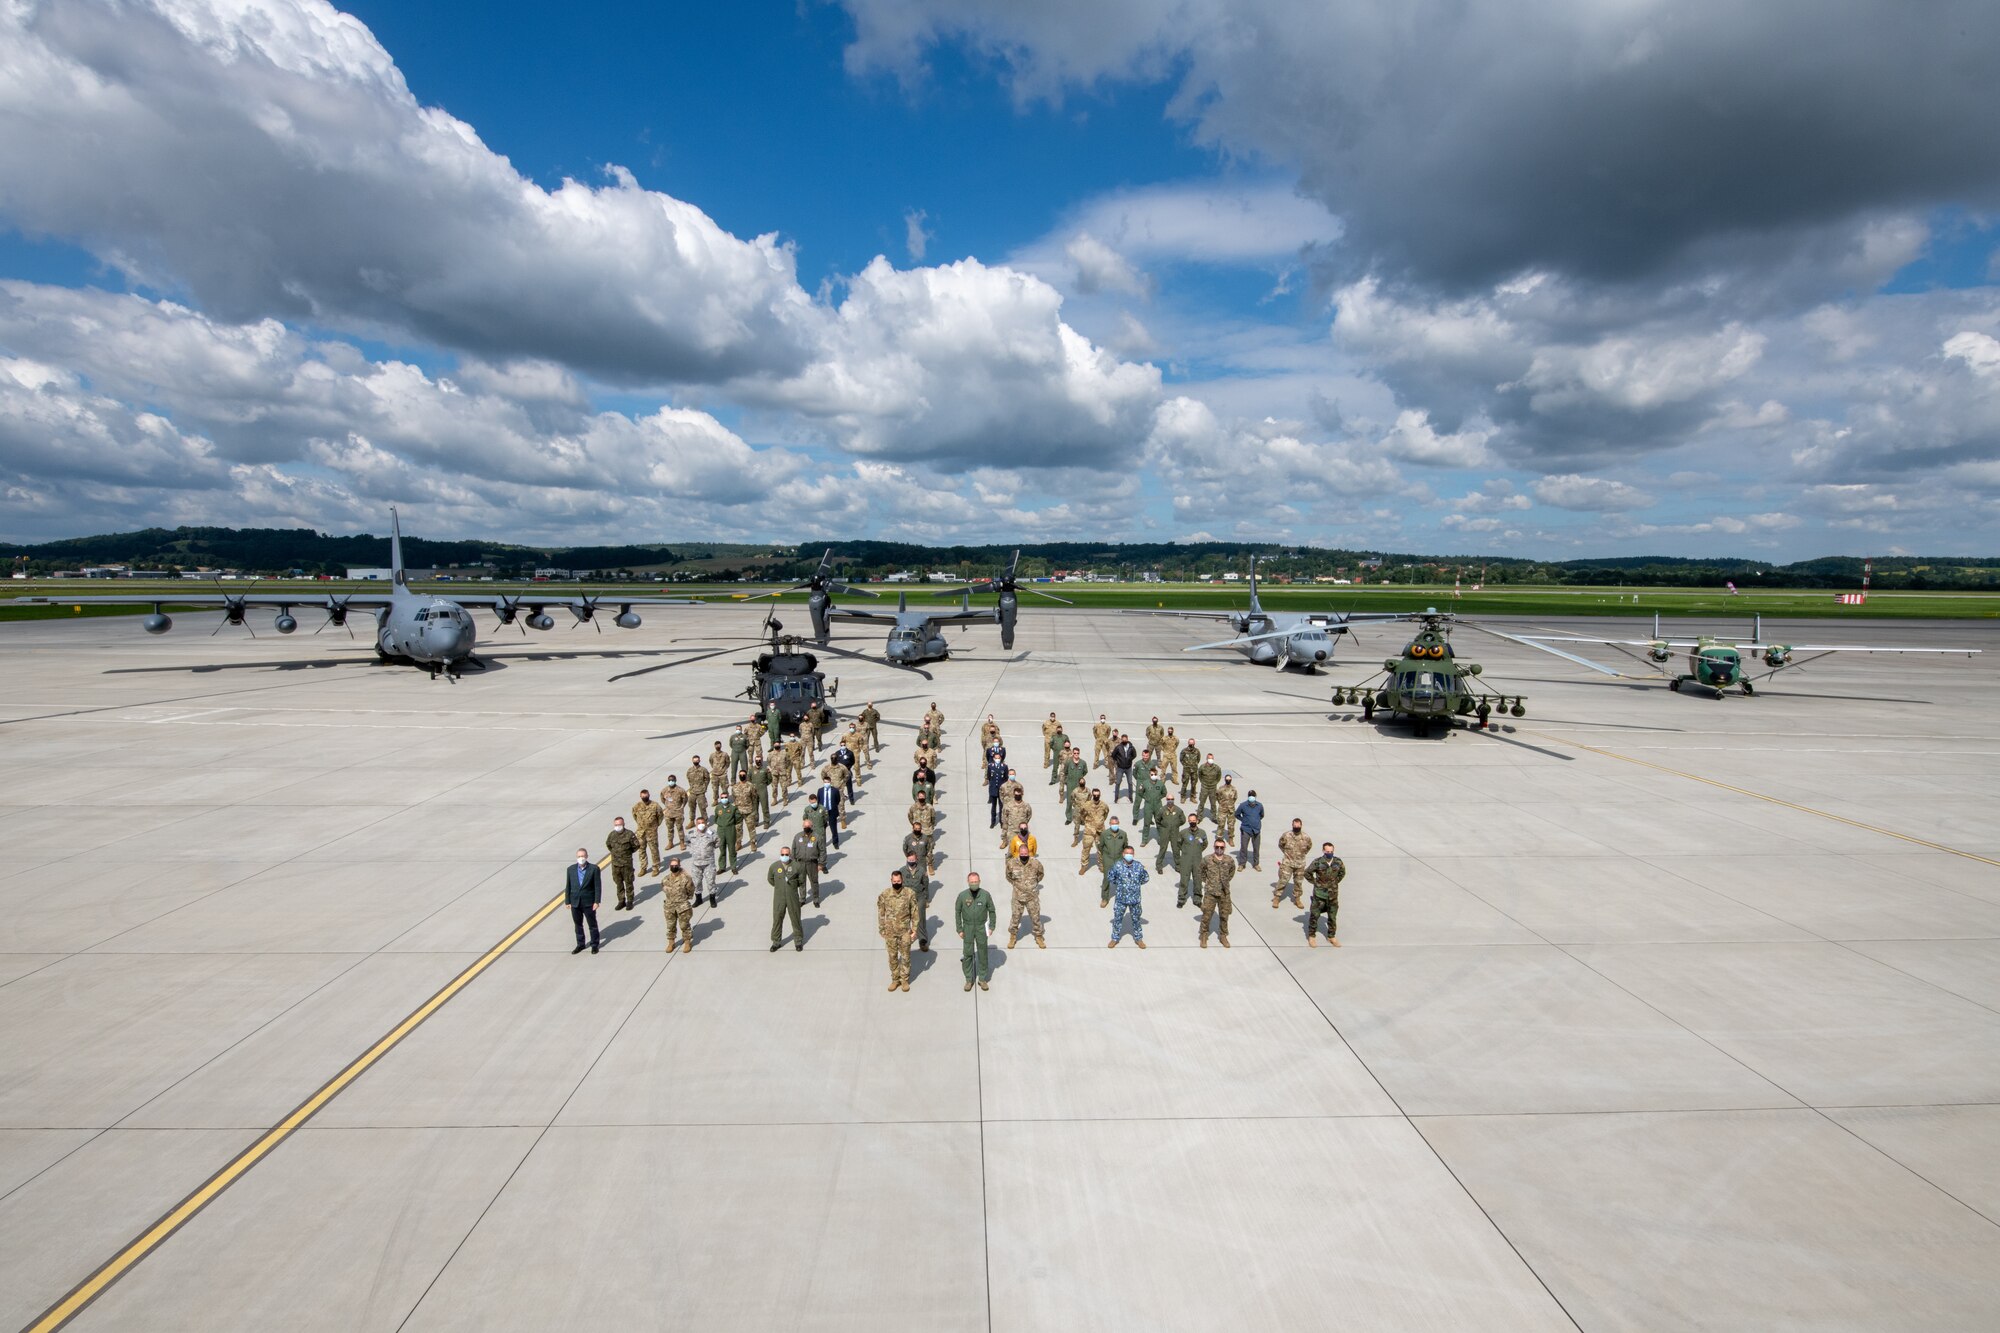 Multinational air force delegates gather for a class photo and static display at the European Partnership Flight event during the Building Partner Aviation Capacity Seminar in Krakow, Poland, Sept. 2, 2021.